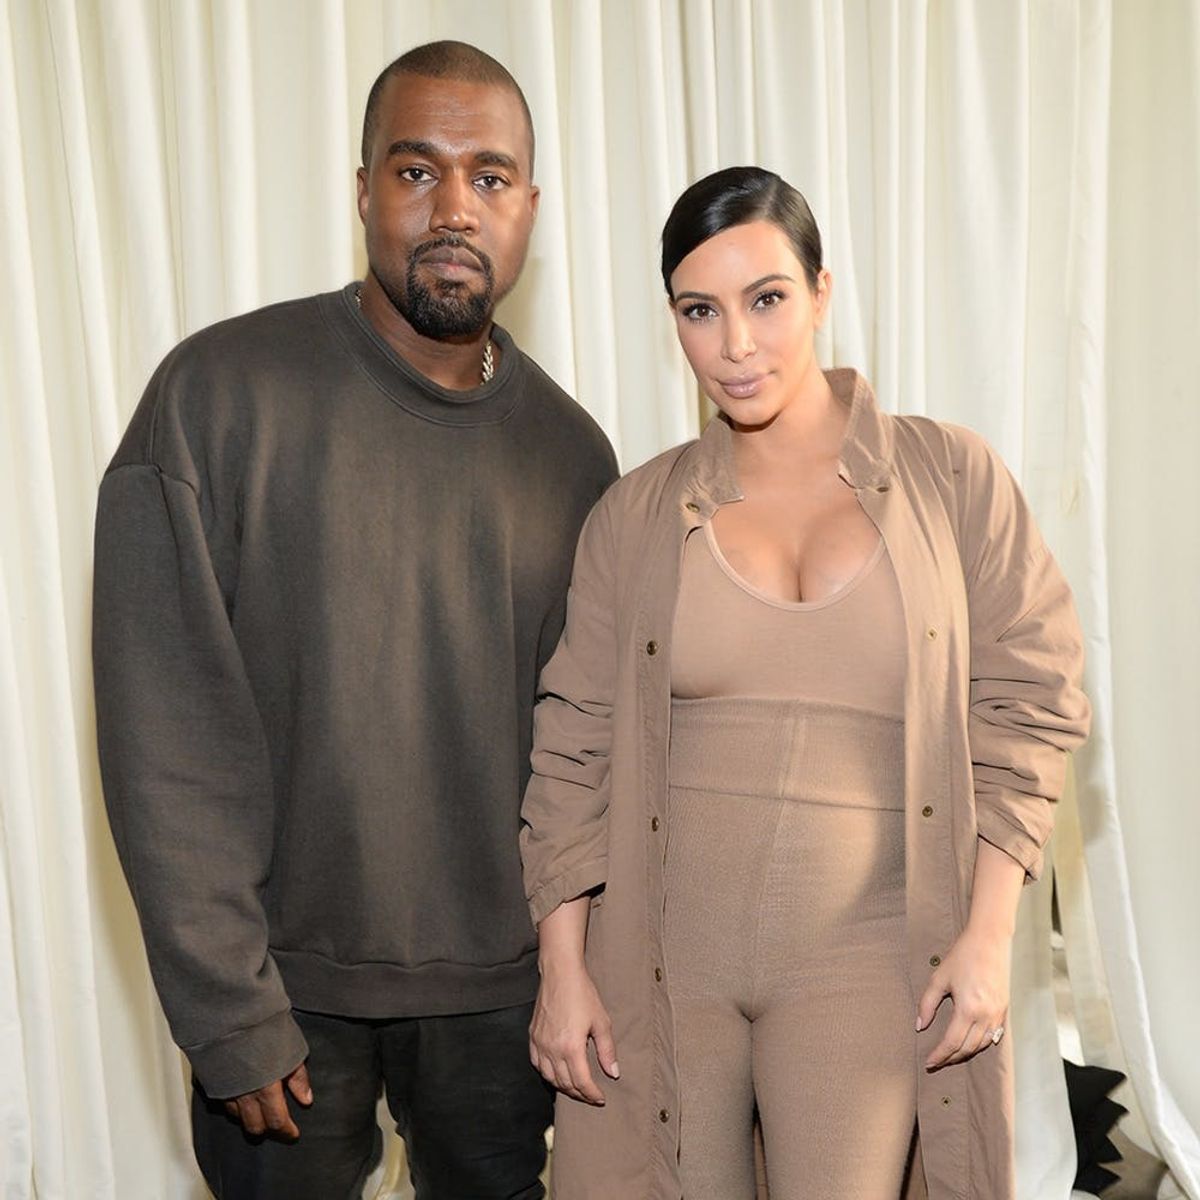 Kim Kardashian + Kanye West Welcome Baby #2 Early With This Sweet Announcement